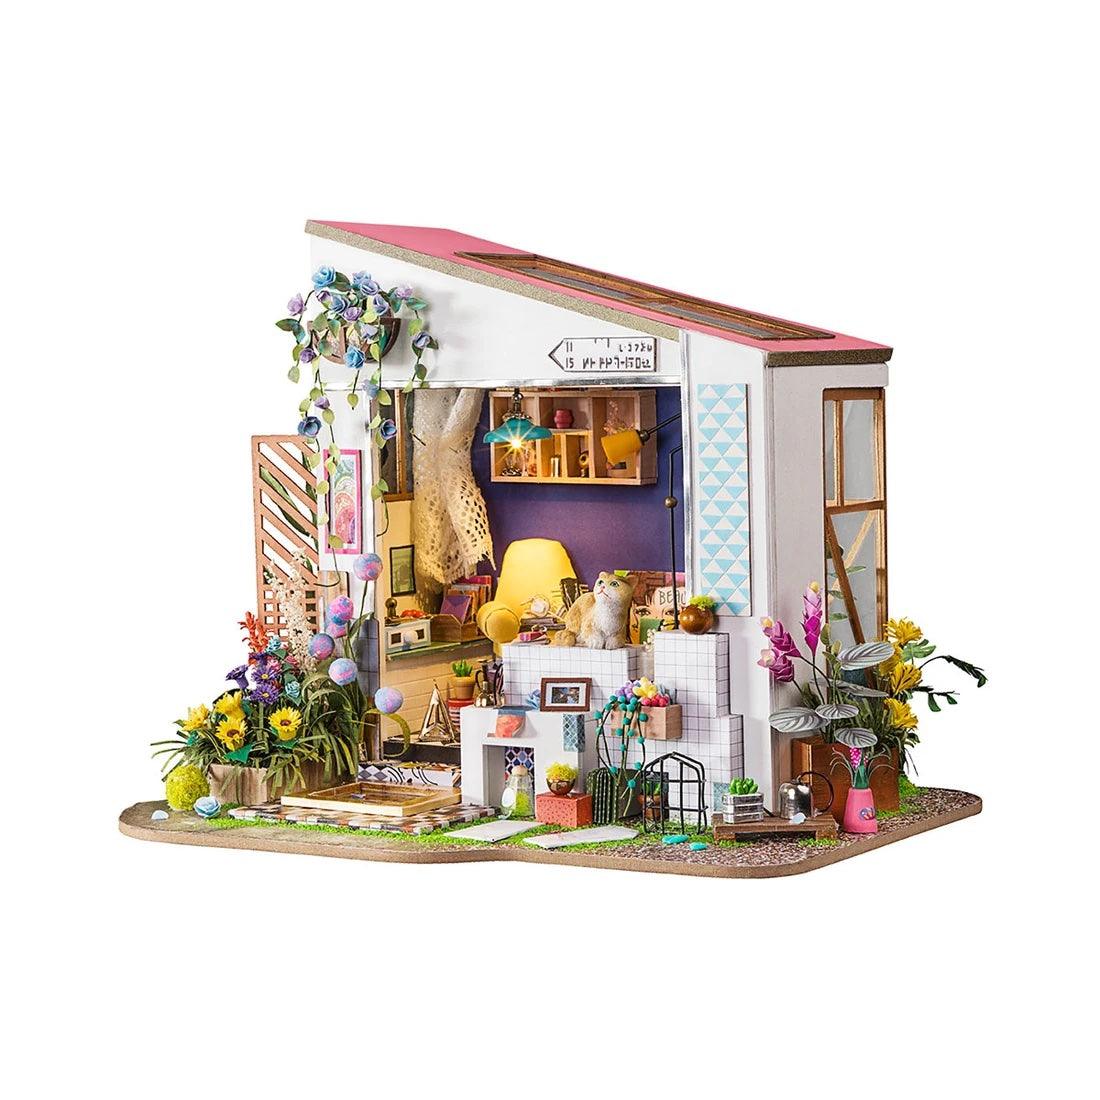 Robotime Lily's Porch Doll House Miniature Studio DIY Kit for Adults and Teens